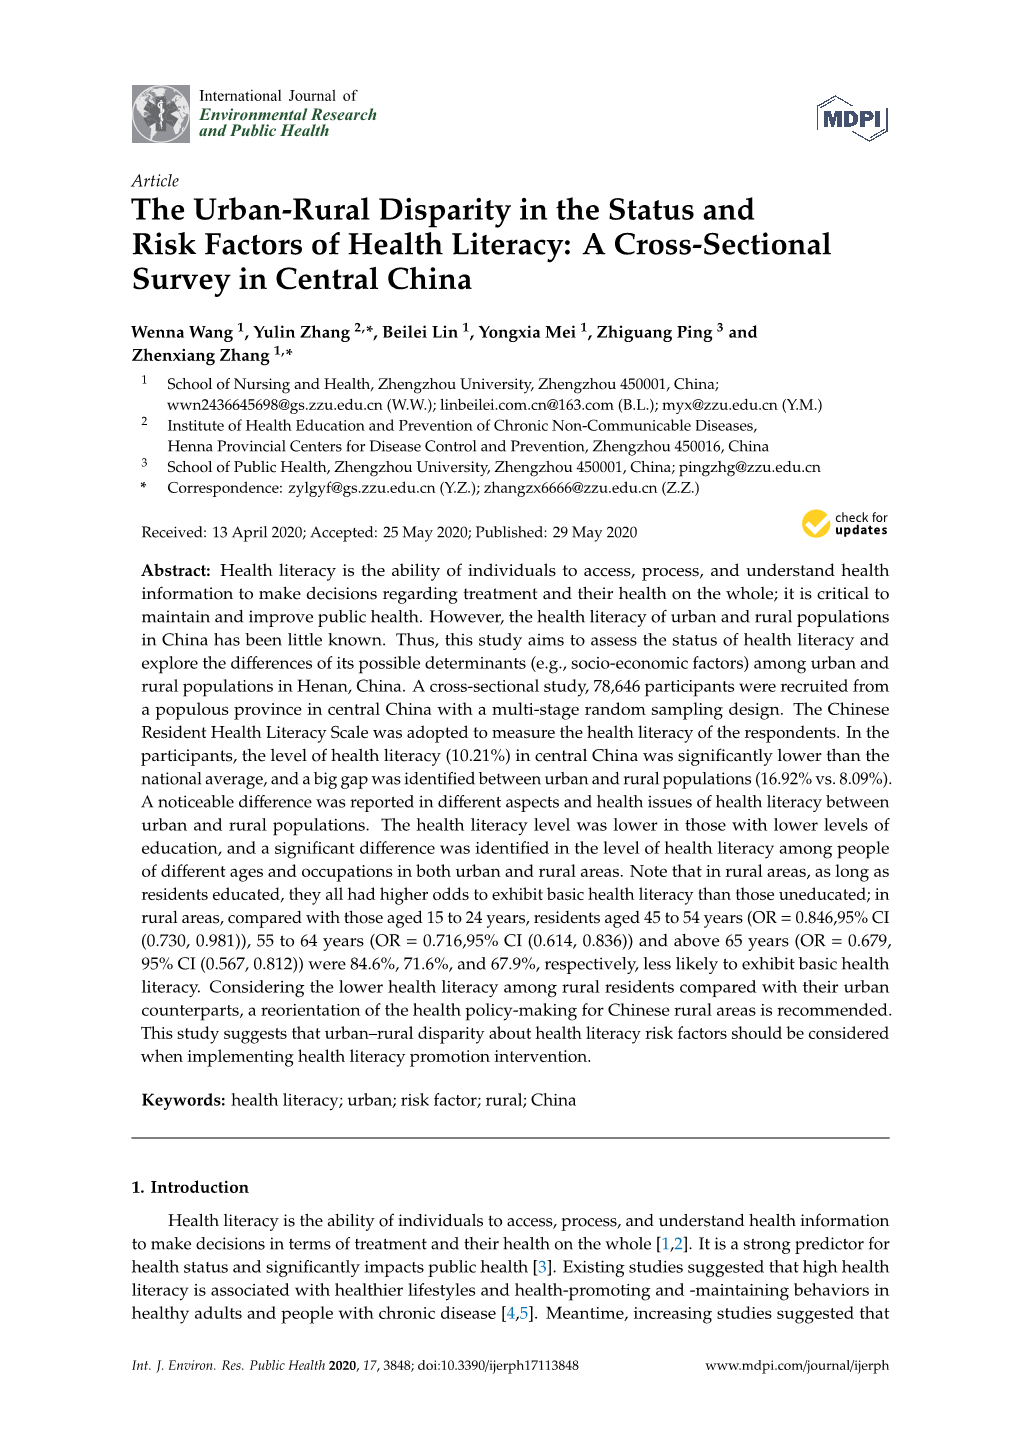 The Urban-Rural Disparity in the Status and Risk Factors of Health Literacy: a Cross-Sectional Survey in Central China